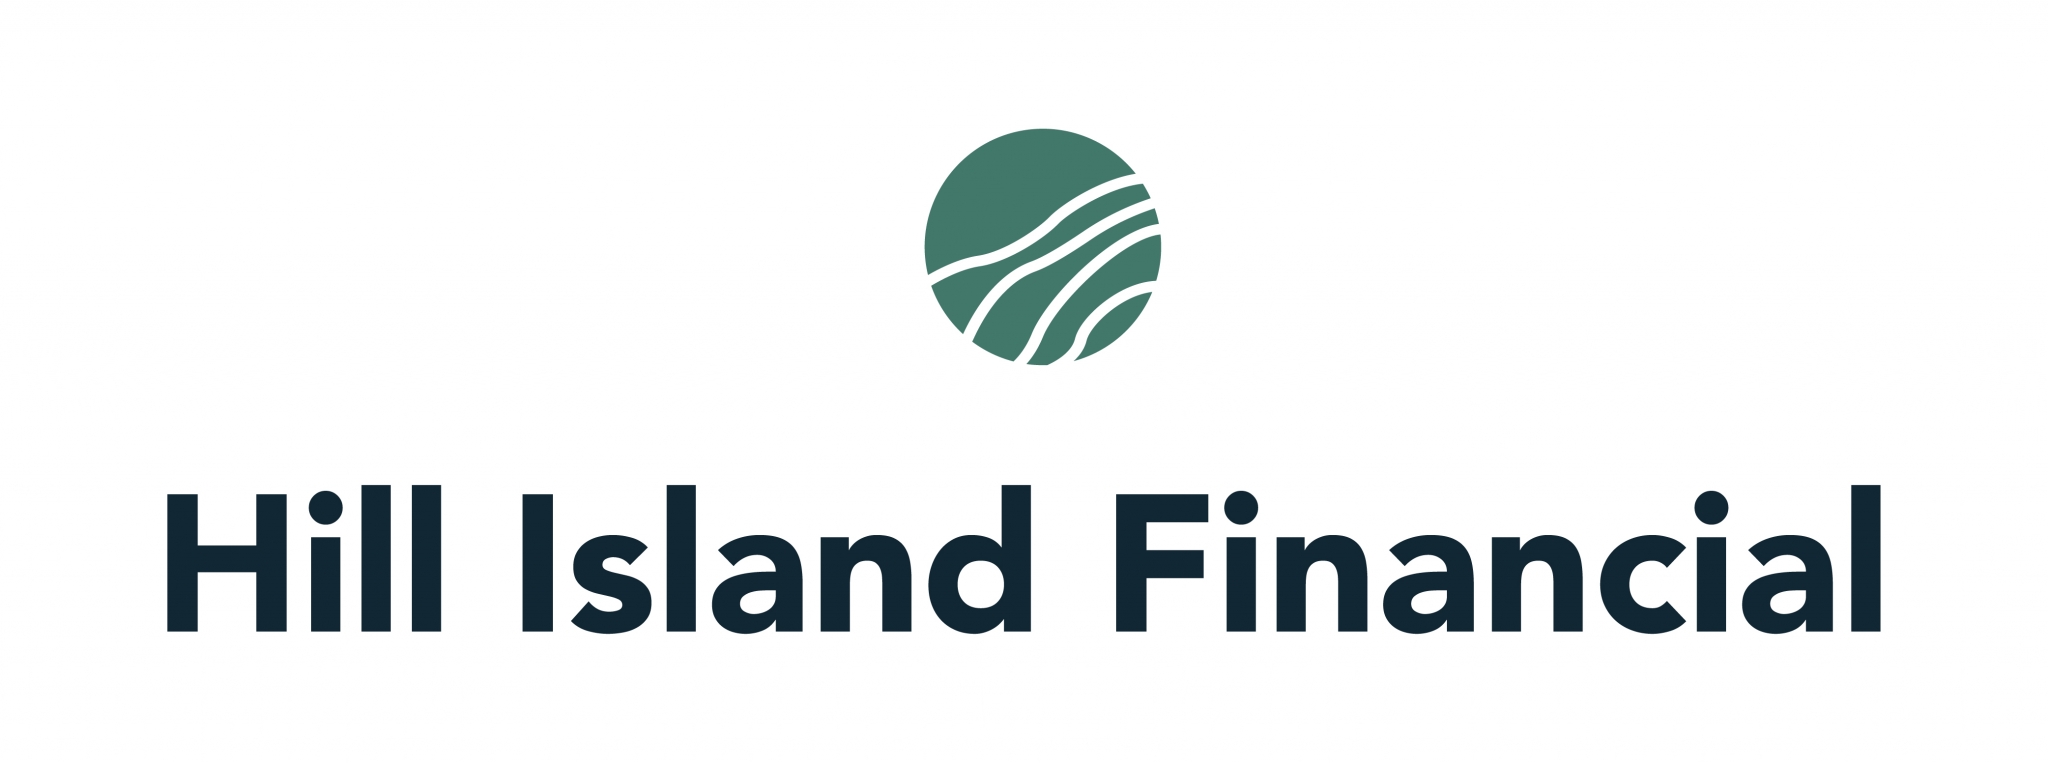 Hill Island Financial — The Best and Brightest